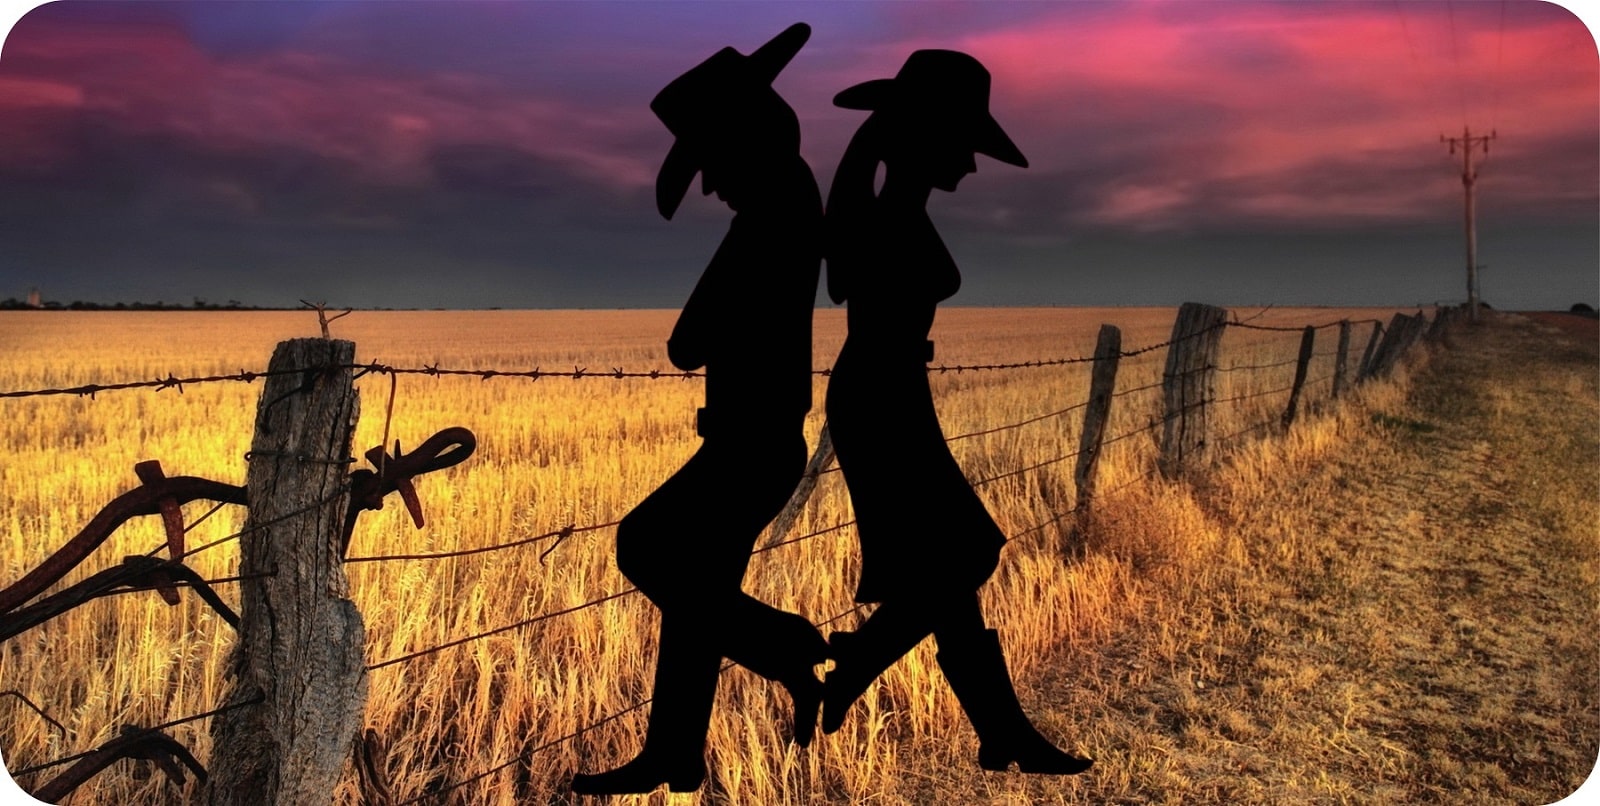 License Plates Online Cowboy And Cowgirl Country Sunset Photo License Plate